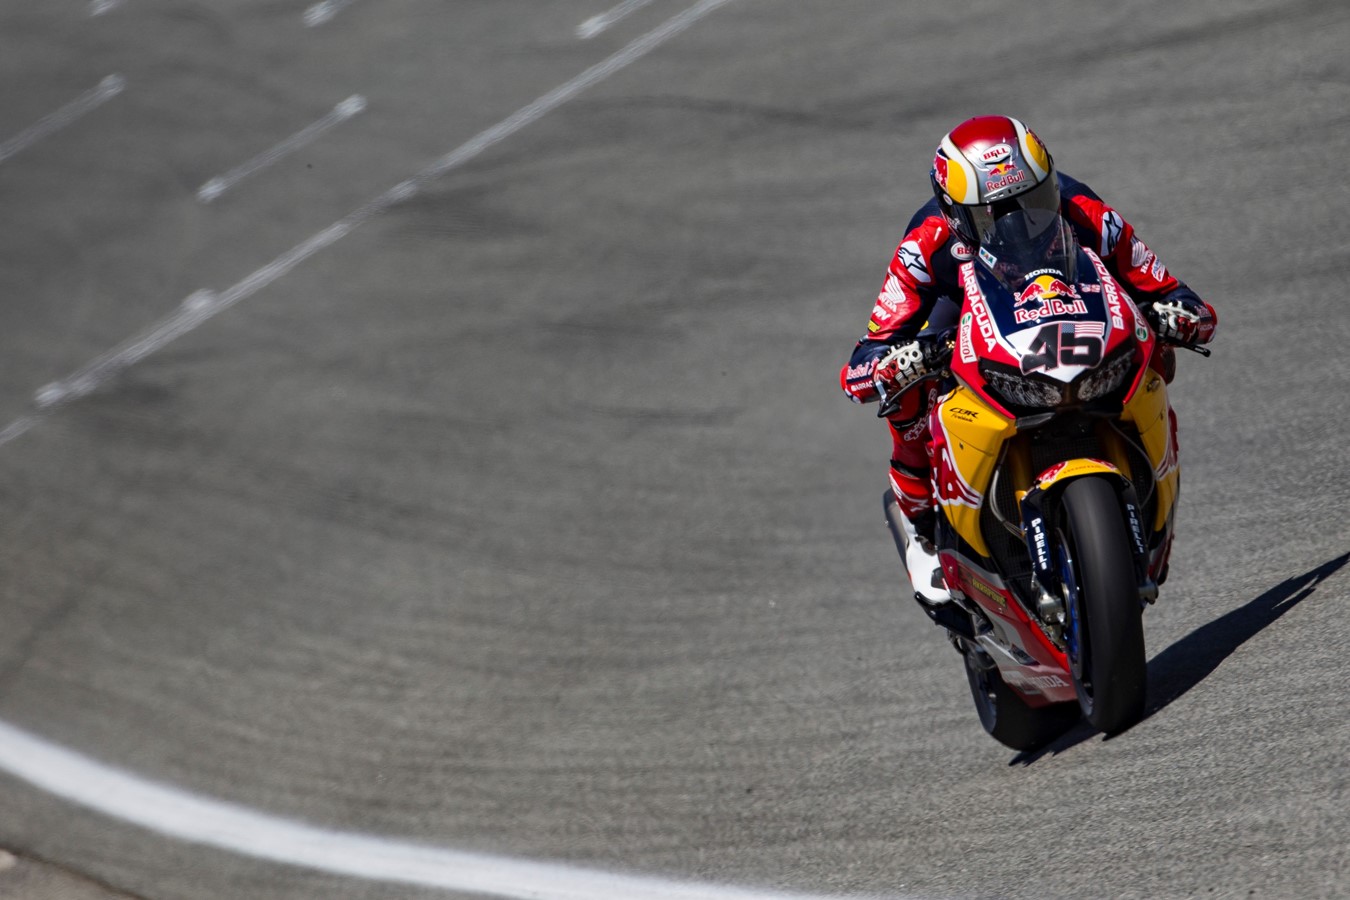 Bradl takes 11th in race one as Gagne scores first WorldSBK point at Laguna